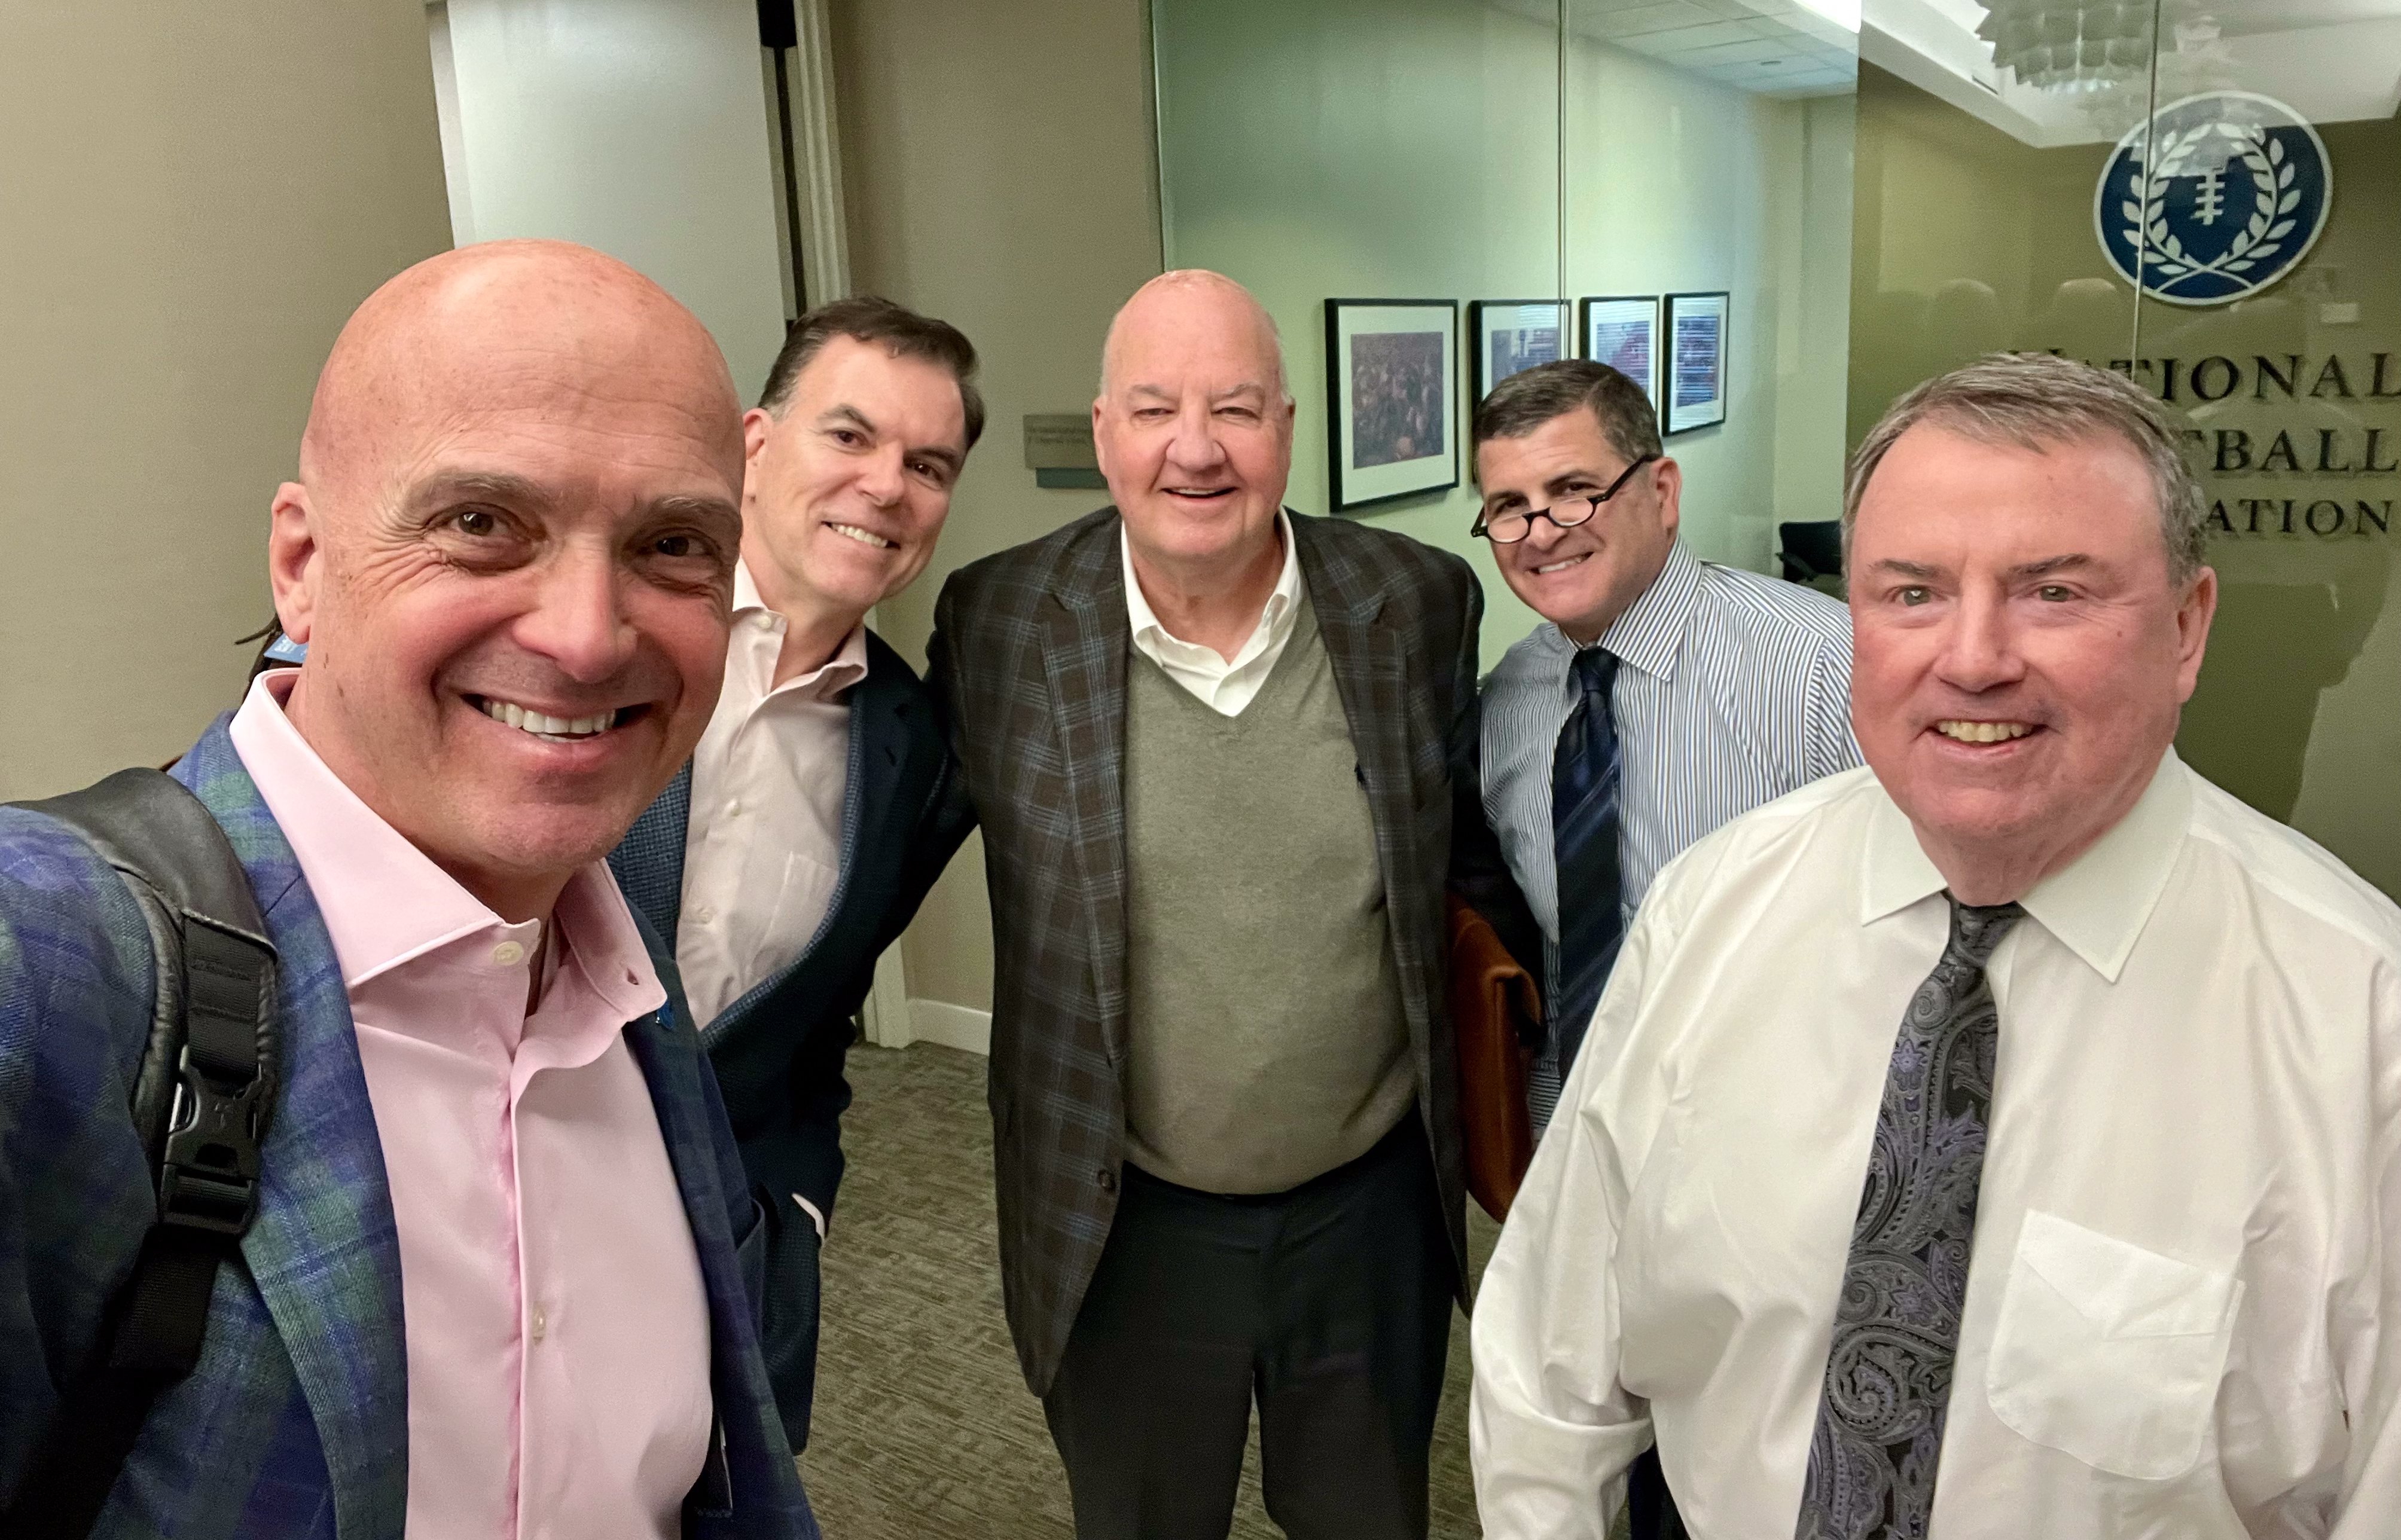 National Football Foundation on X: Great meeting today at NFF Headquarters  with Fishbait Solutions leaders Rick Jones, Rob Temple and Rusty Reed!   / X